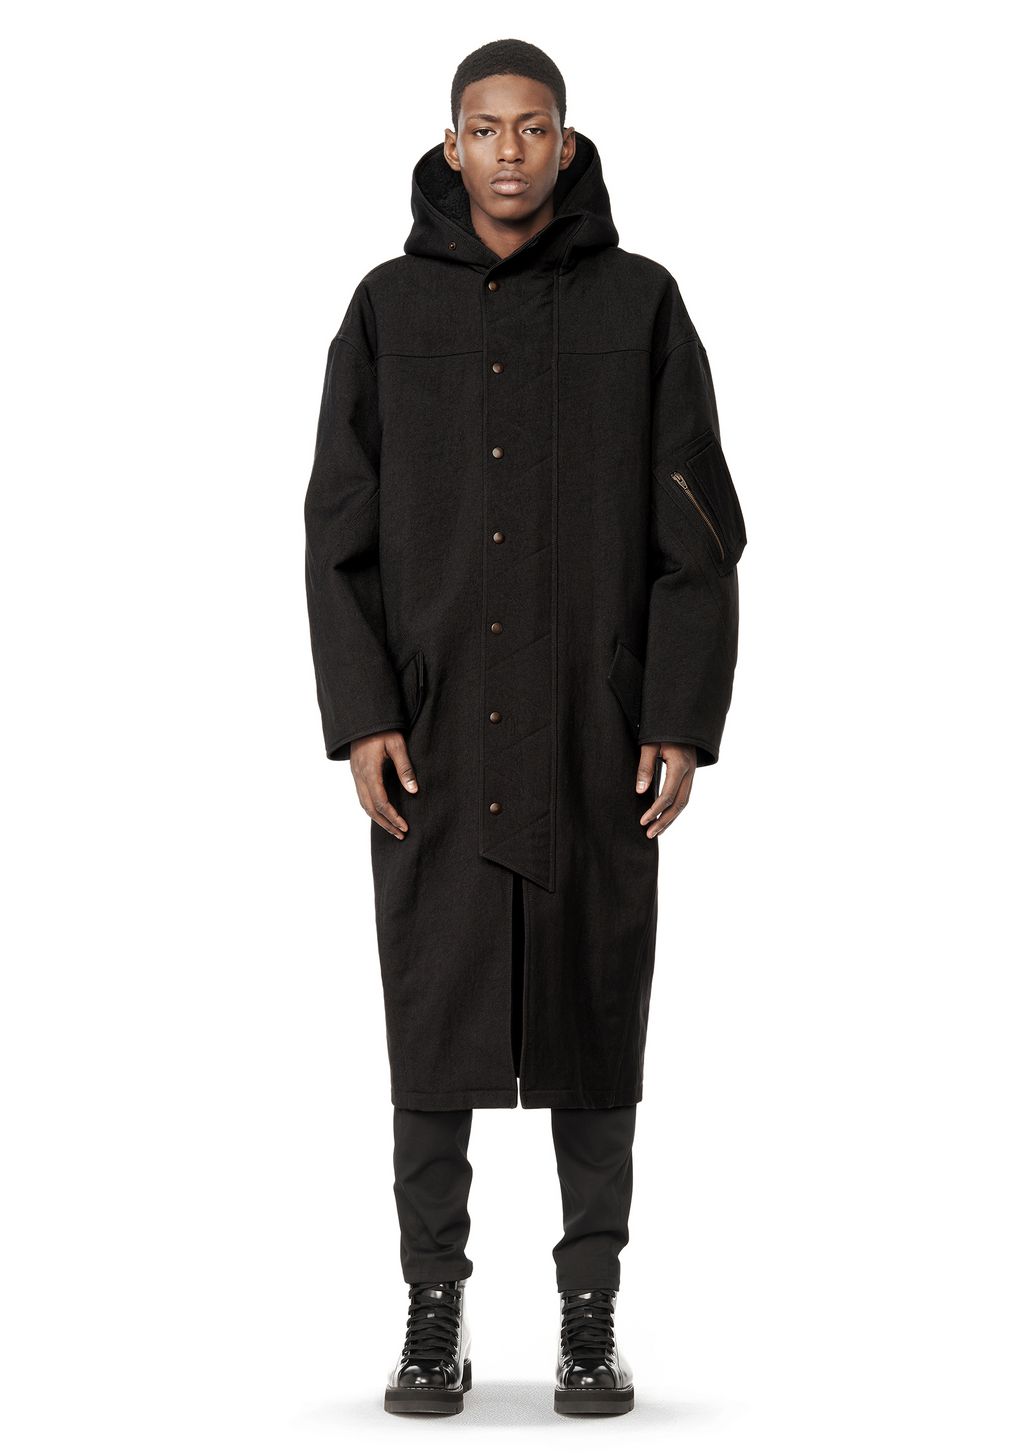 Alexander Wang ‎OVERSIZED HOODED COAT ‎ ‎JACKETS AND OUTERWEAR ...